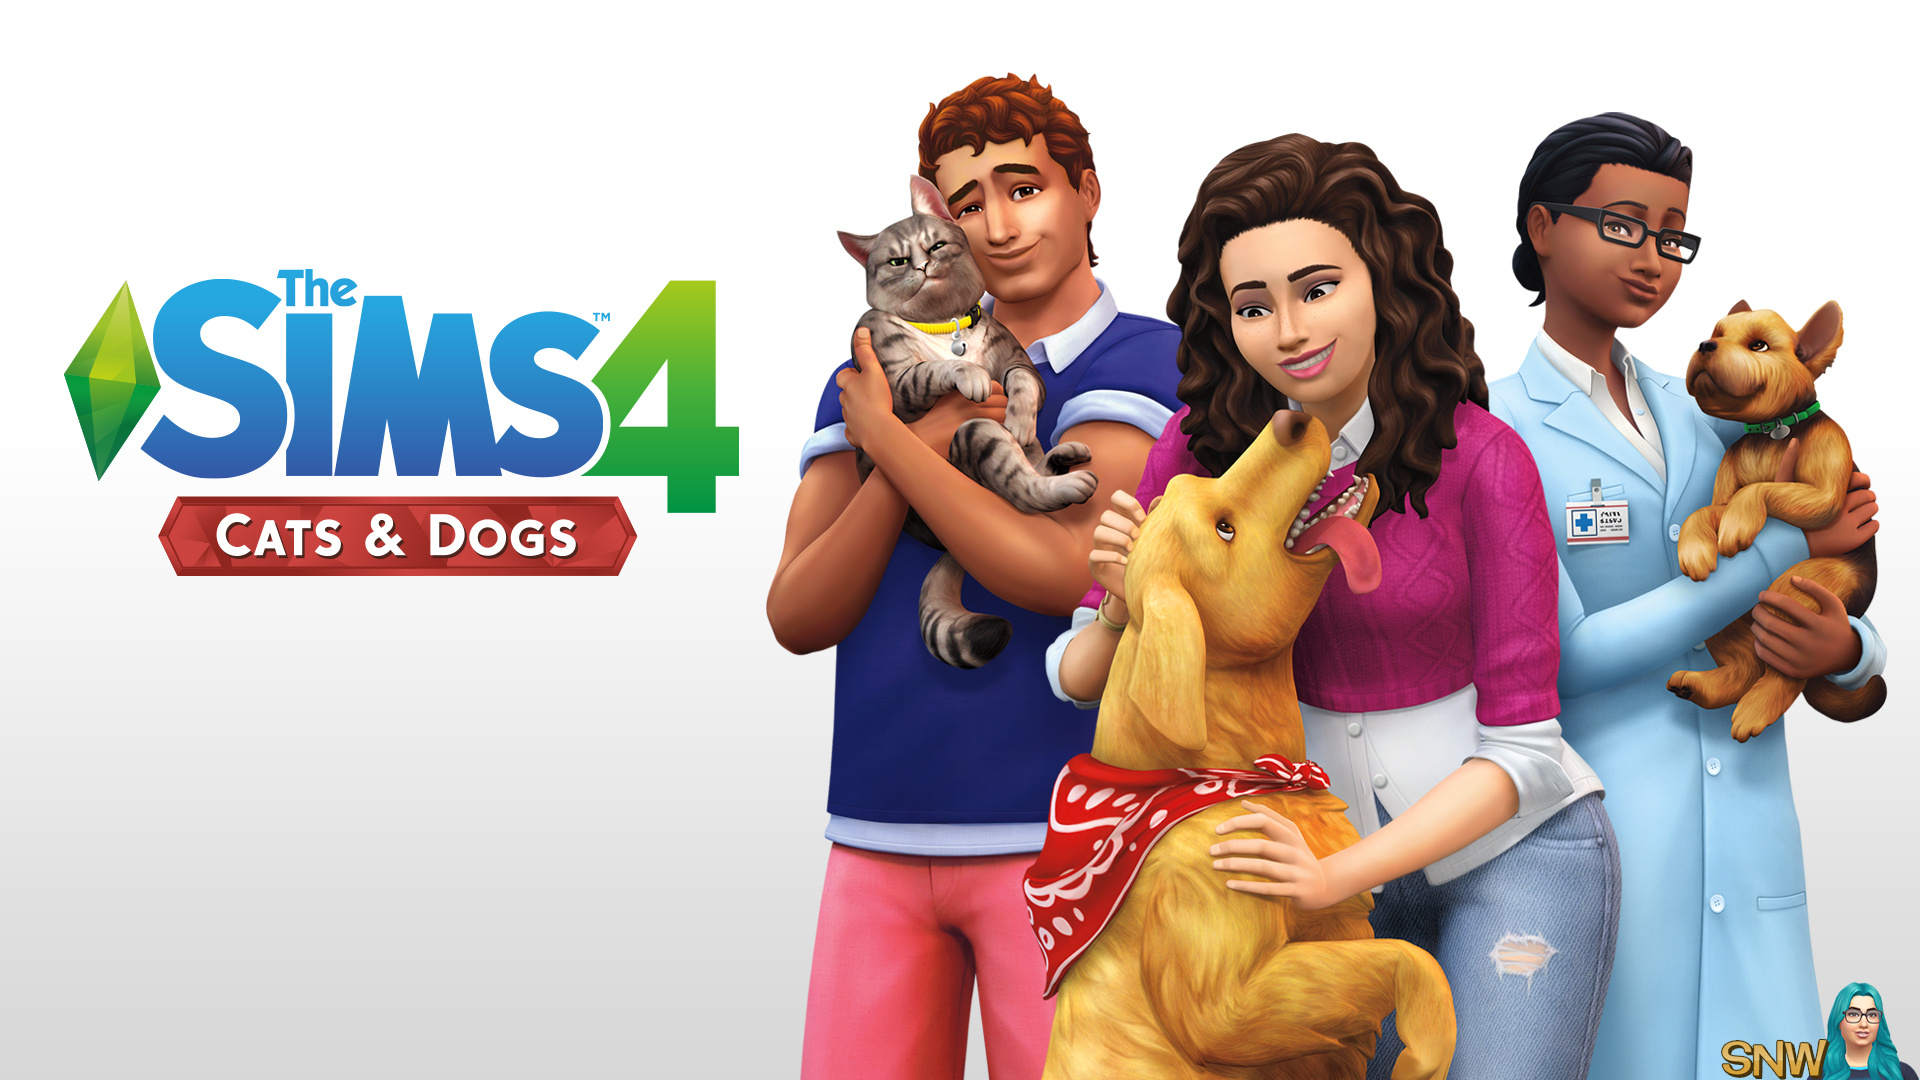 sims 4 cats and dogs game code